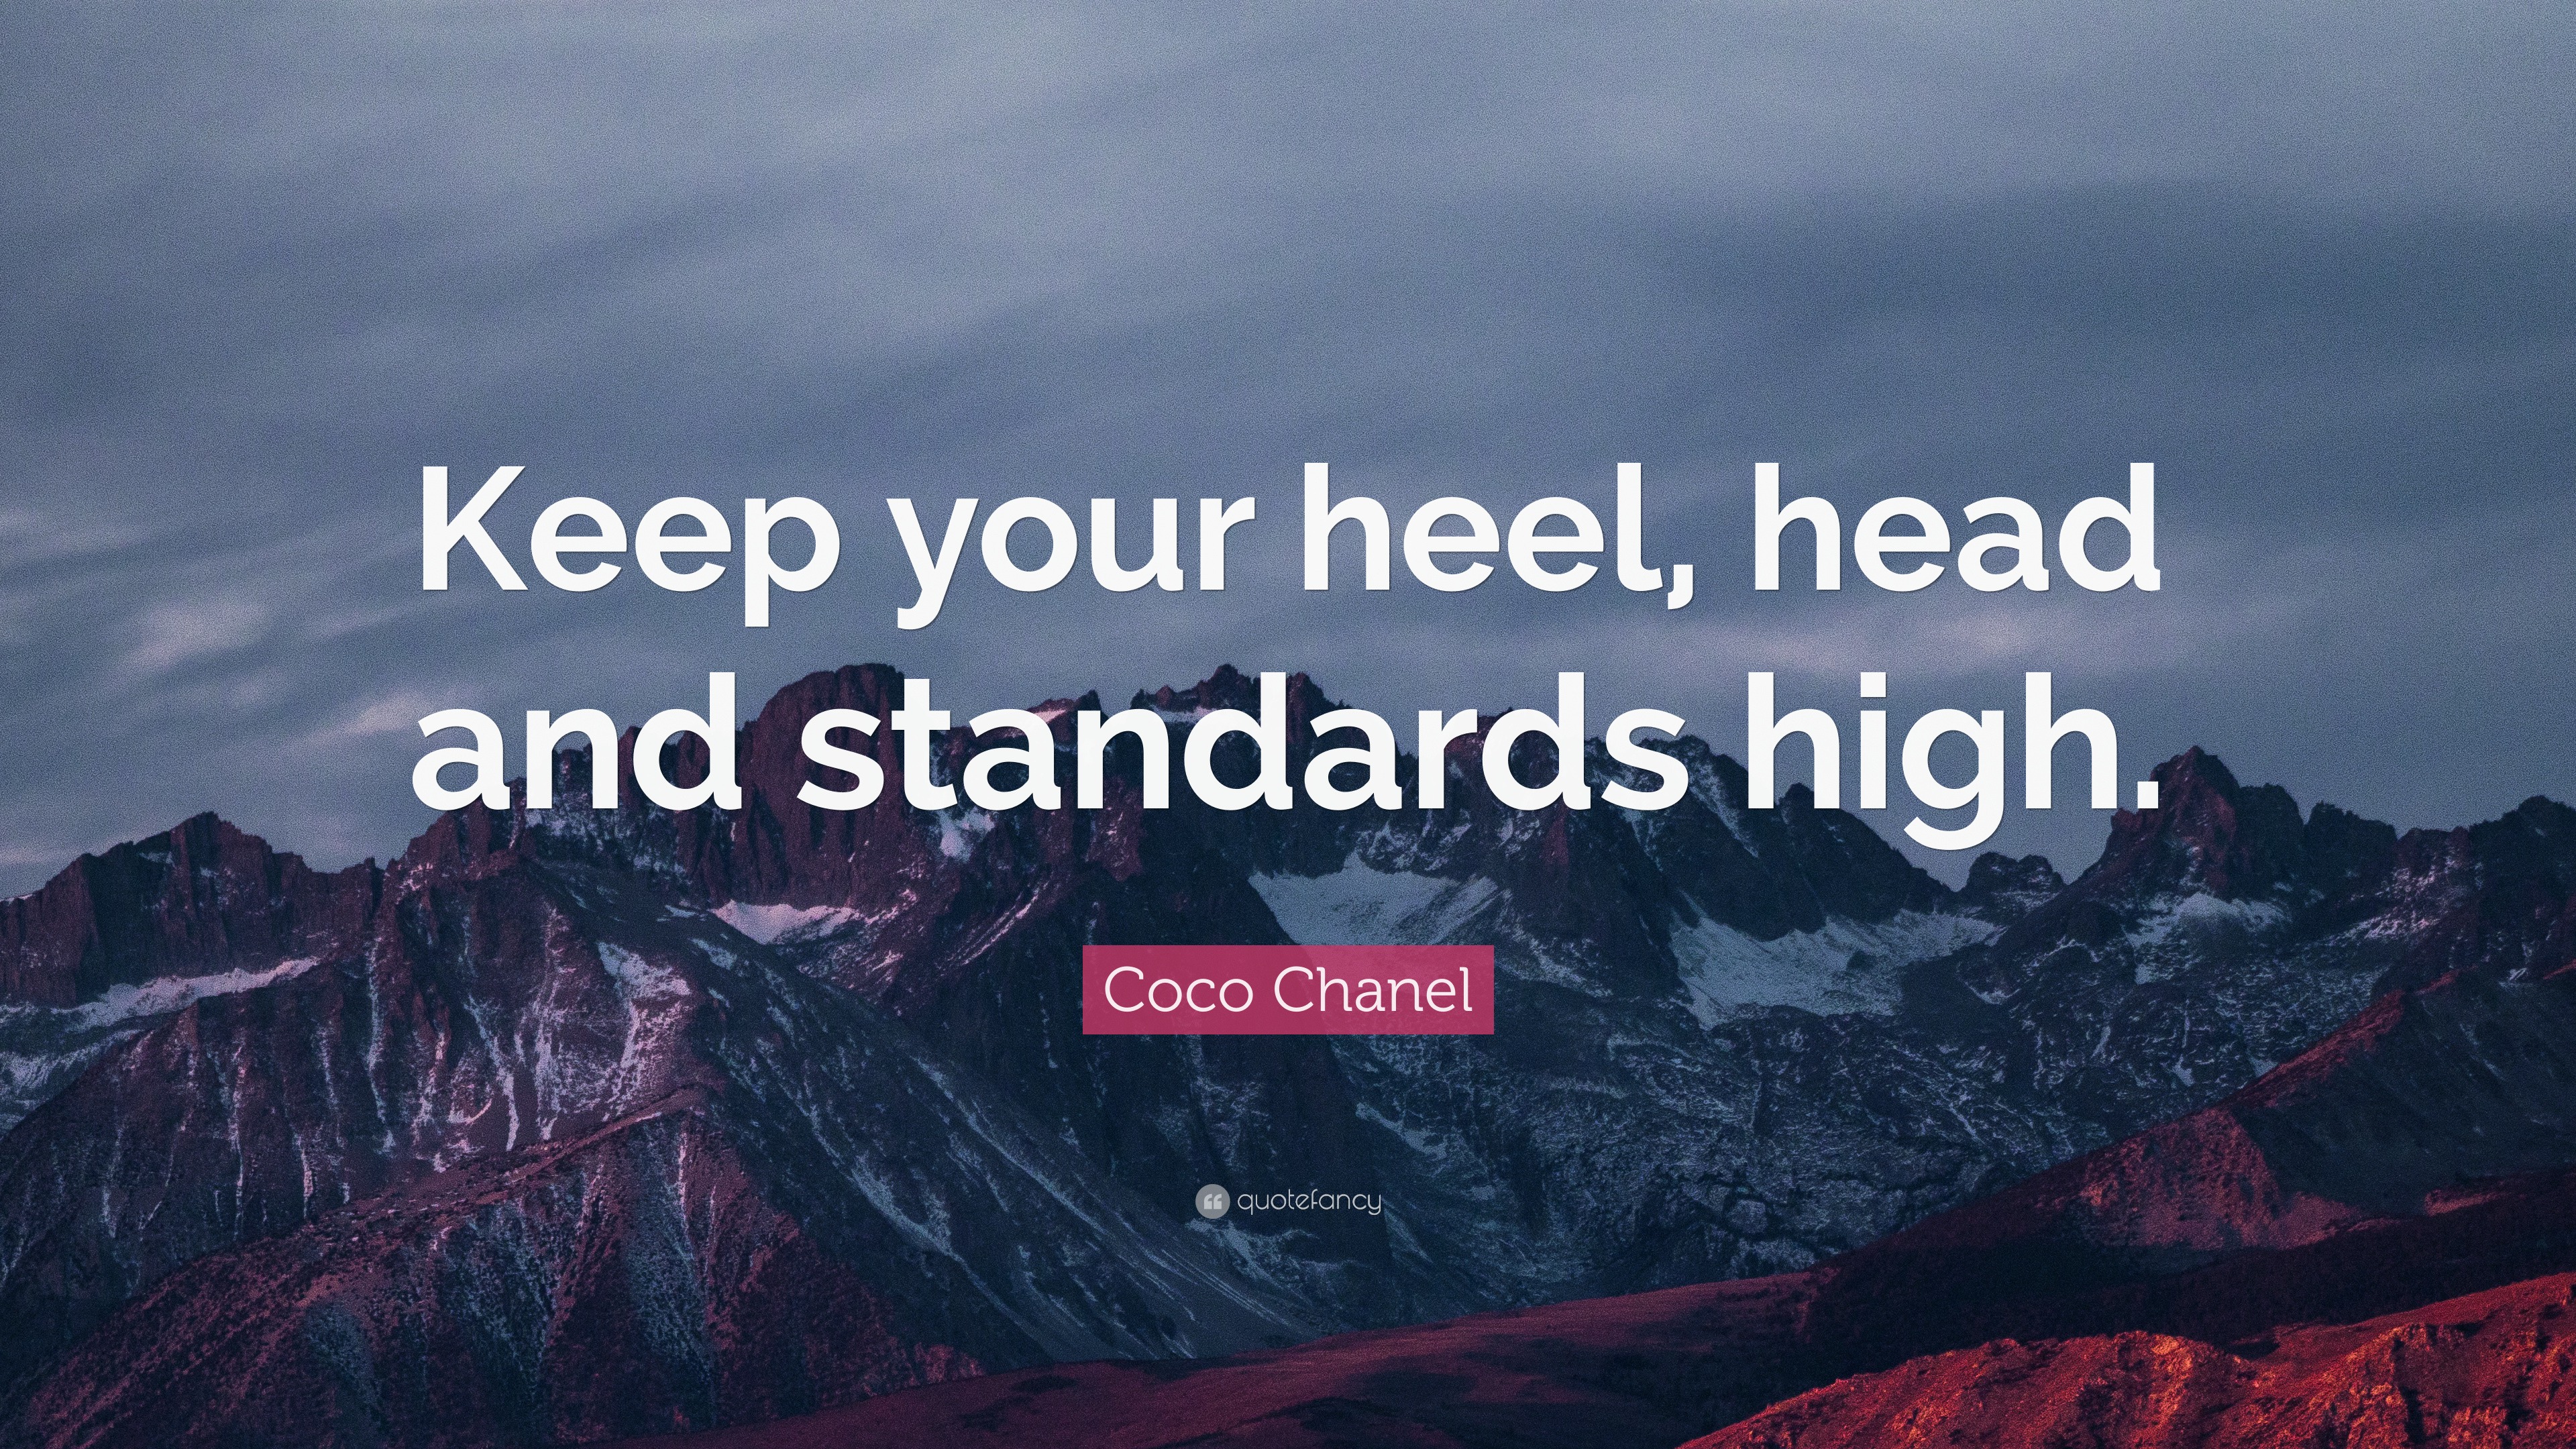 Heels Quotes And Sayings. QuotesGram